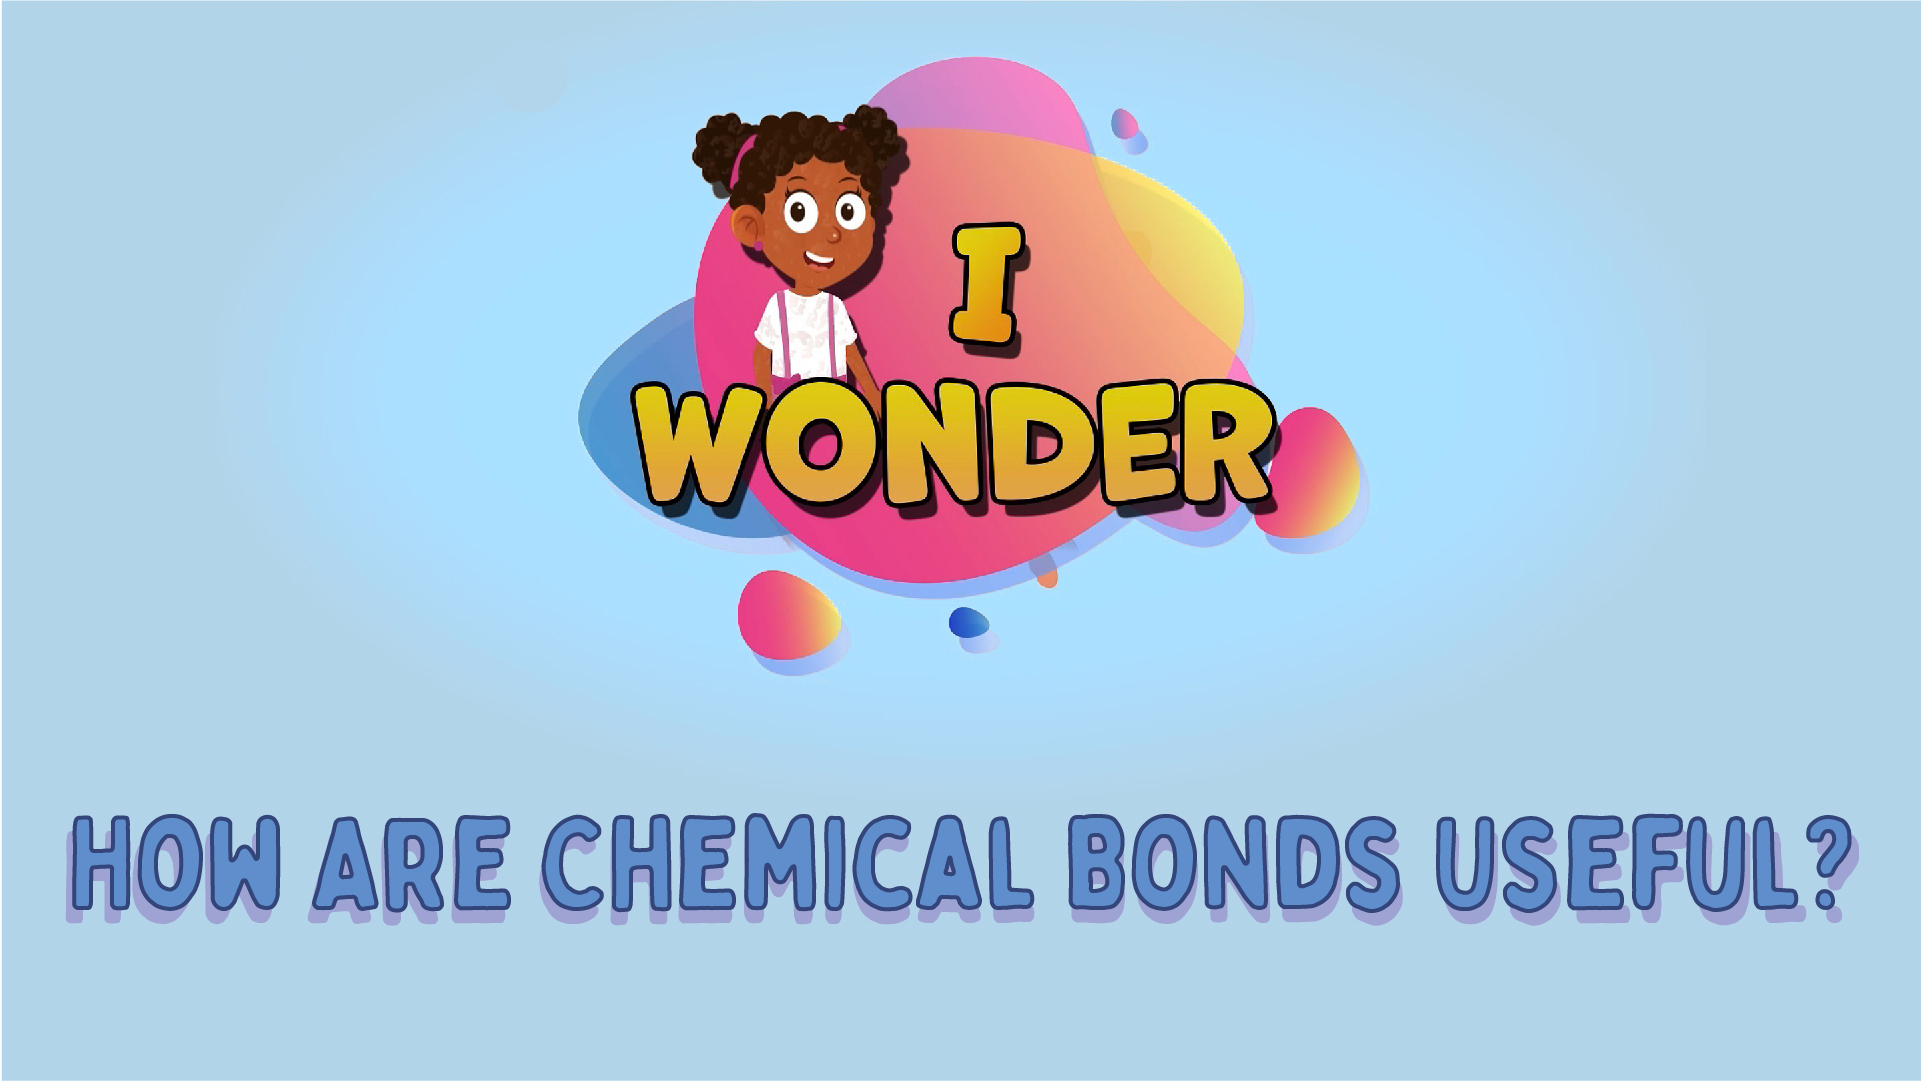 How Are Chemical Bonds Useful?